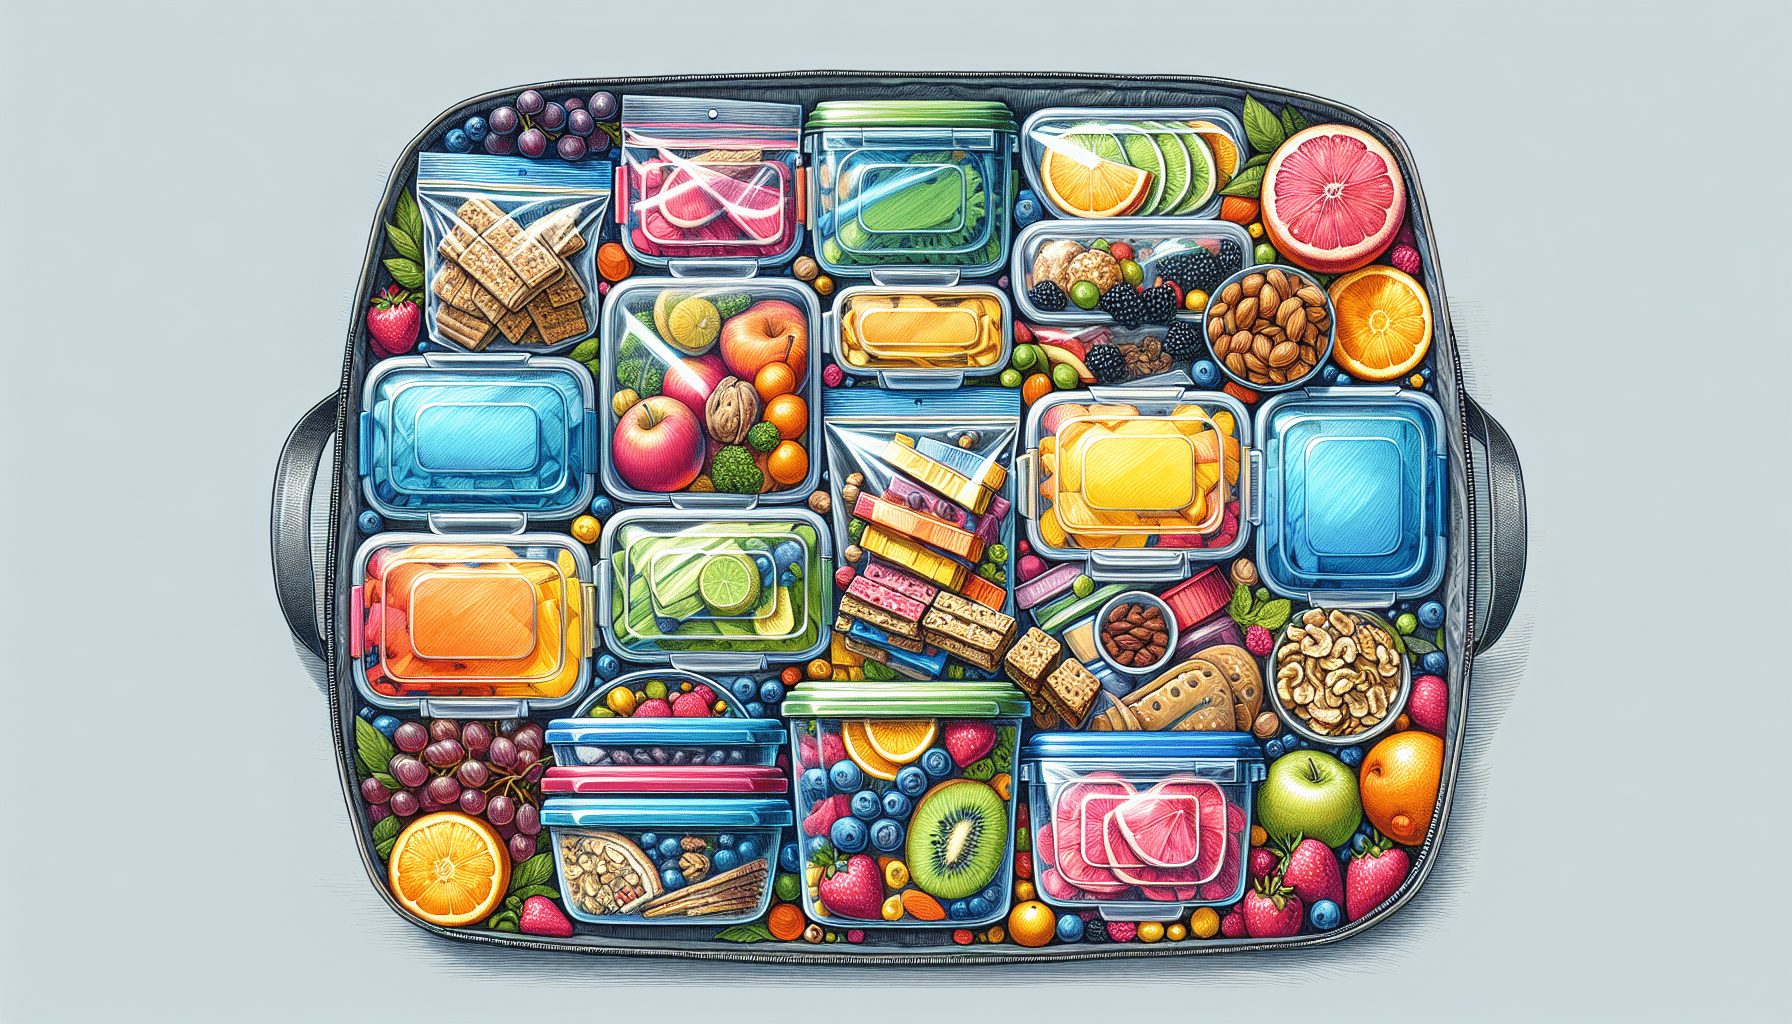 Packing travel-friendly foods in containers and ziplock bags